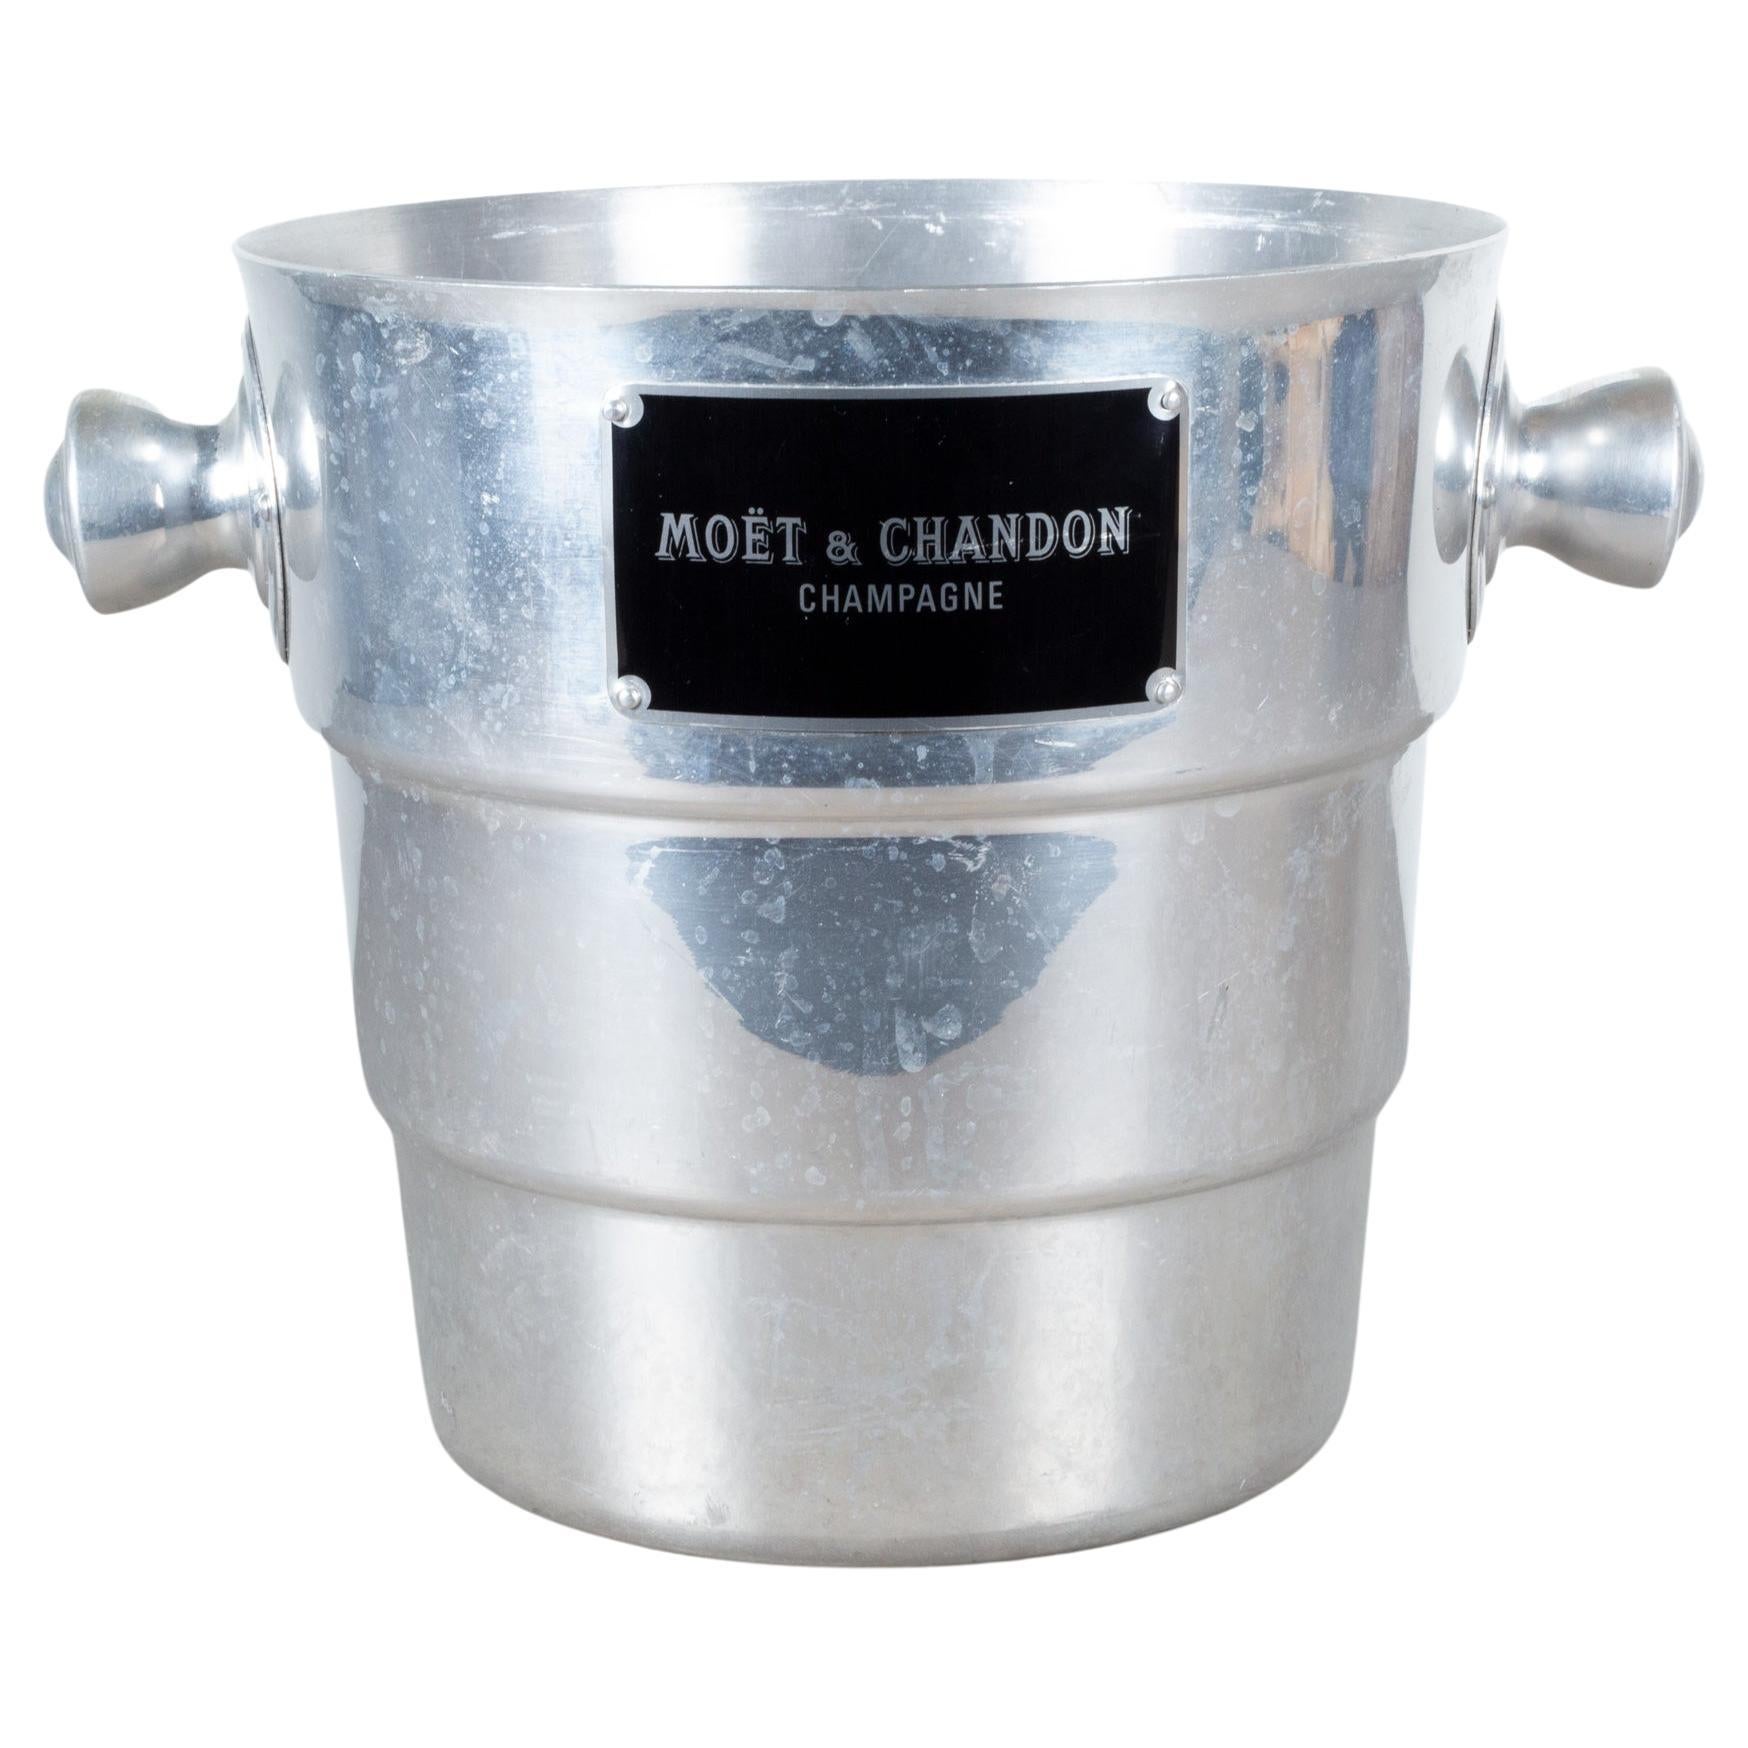 Vintage Moet & Chandon Champagne Ice Bucket c.1940 (FREE SHIPPING)